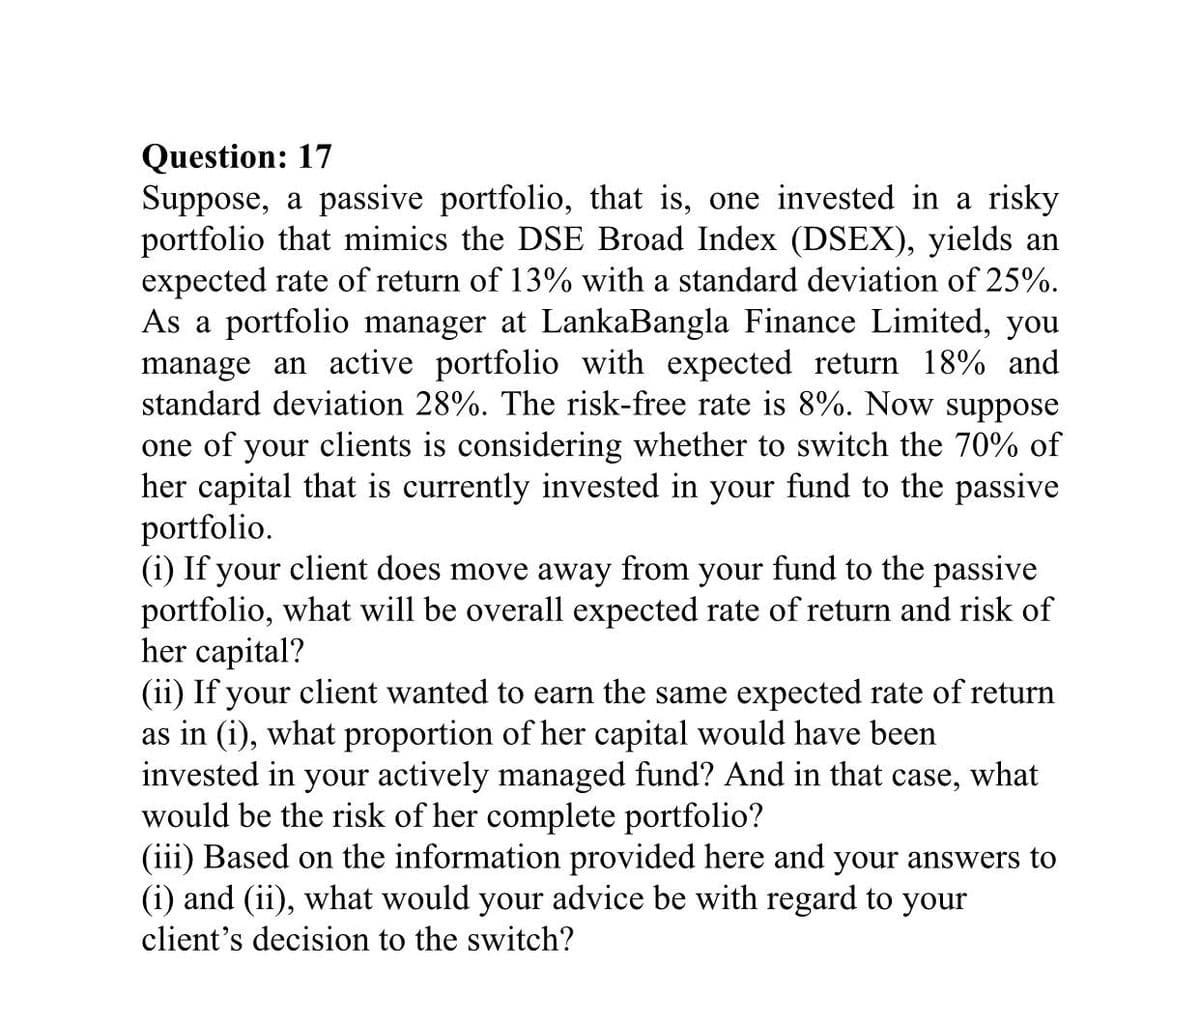 Question: 17
Suppose, a passive portfolio, that is, one invested in a risky
portfolio that mimics the DSE Broad Index (DSEX), yields an
expected rate of return of 13% with a standard deviation of 25%.
As a portfolio manager at LankaBangla Finance Limited, you
manage an active portfolio with expected return 18% and
standard deviation 28%. The risk-free rate is 8%. Now suppose
one of your clients is considering whether to switch the 70% of
her capital that is currently invested in your fund to the passive
portfolio.
(i) If your client does move away from your fund to the passive
portfolio, what will be overall expected rate of return and risk of
her capital?
(ii) If your client wanted to earn the same expected rate of return
as in (i), what proportion of her capital would have been
invested in your actively managed fund? And in that case, what
would be the risk of her complete portfolio?
(iii) Based on the information provided here and your answers to
(i) and (ii), what would your advice be with regard to your
client's decision to the switch?
